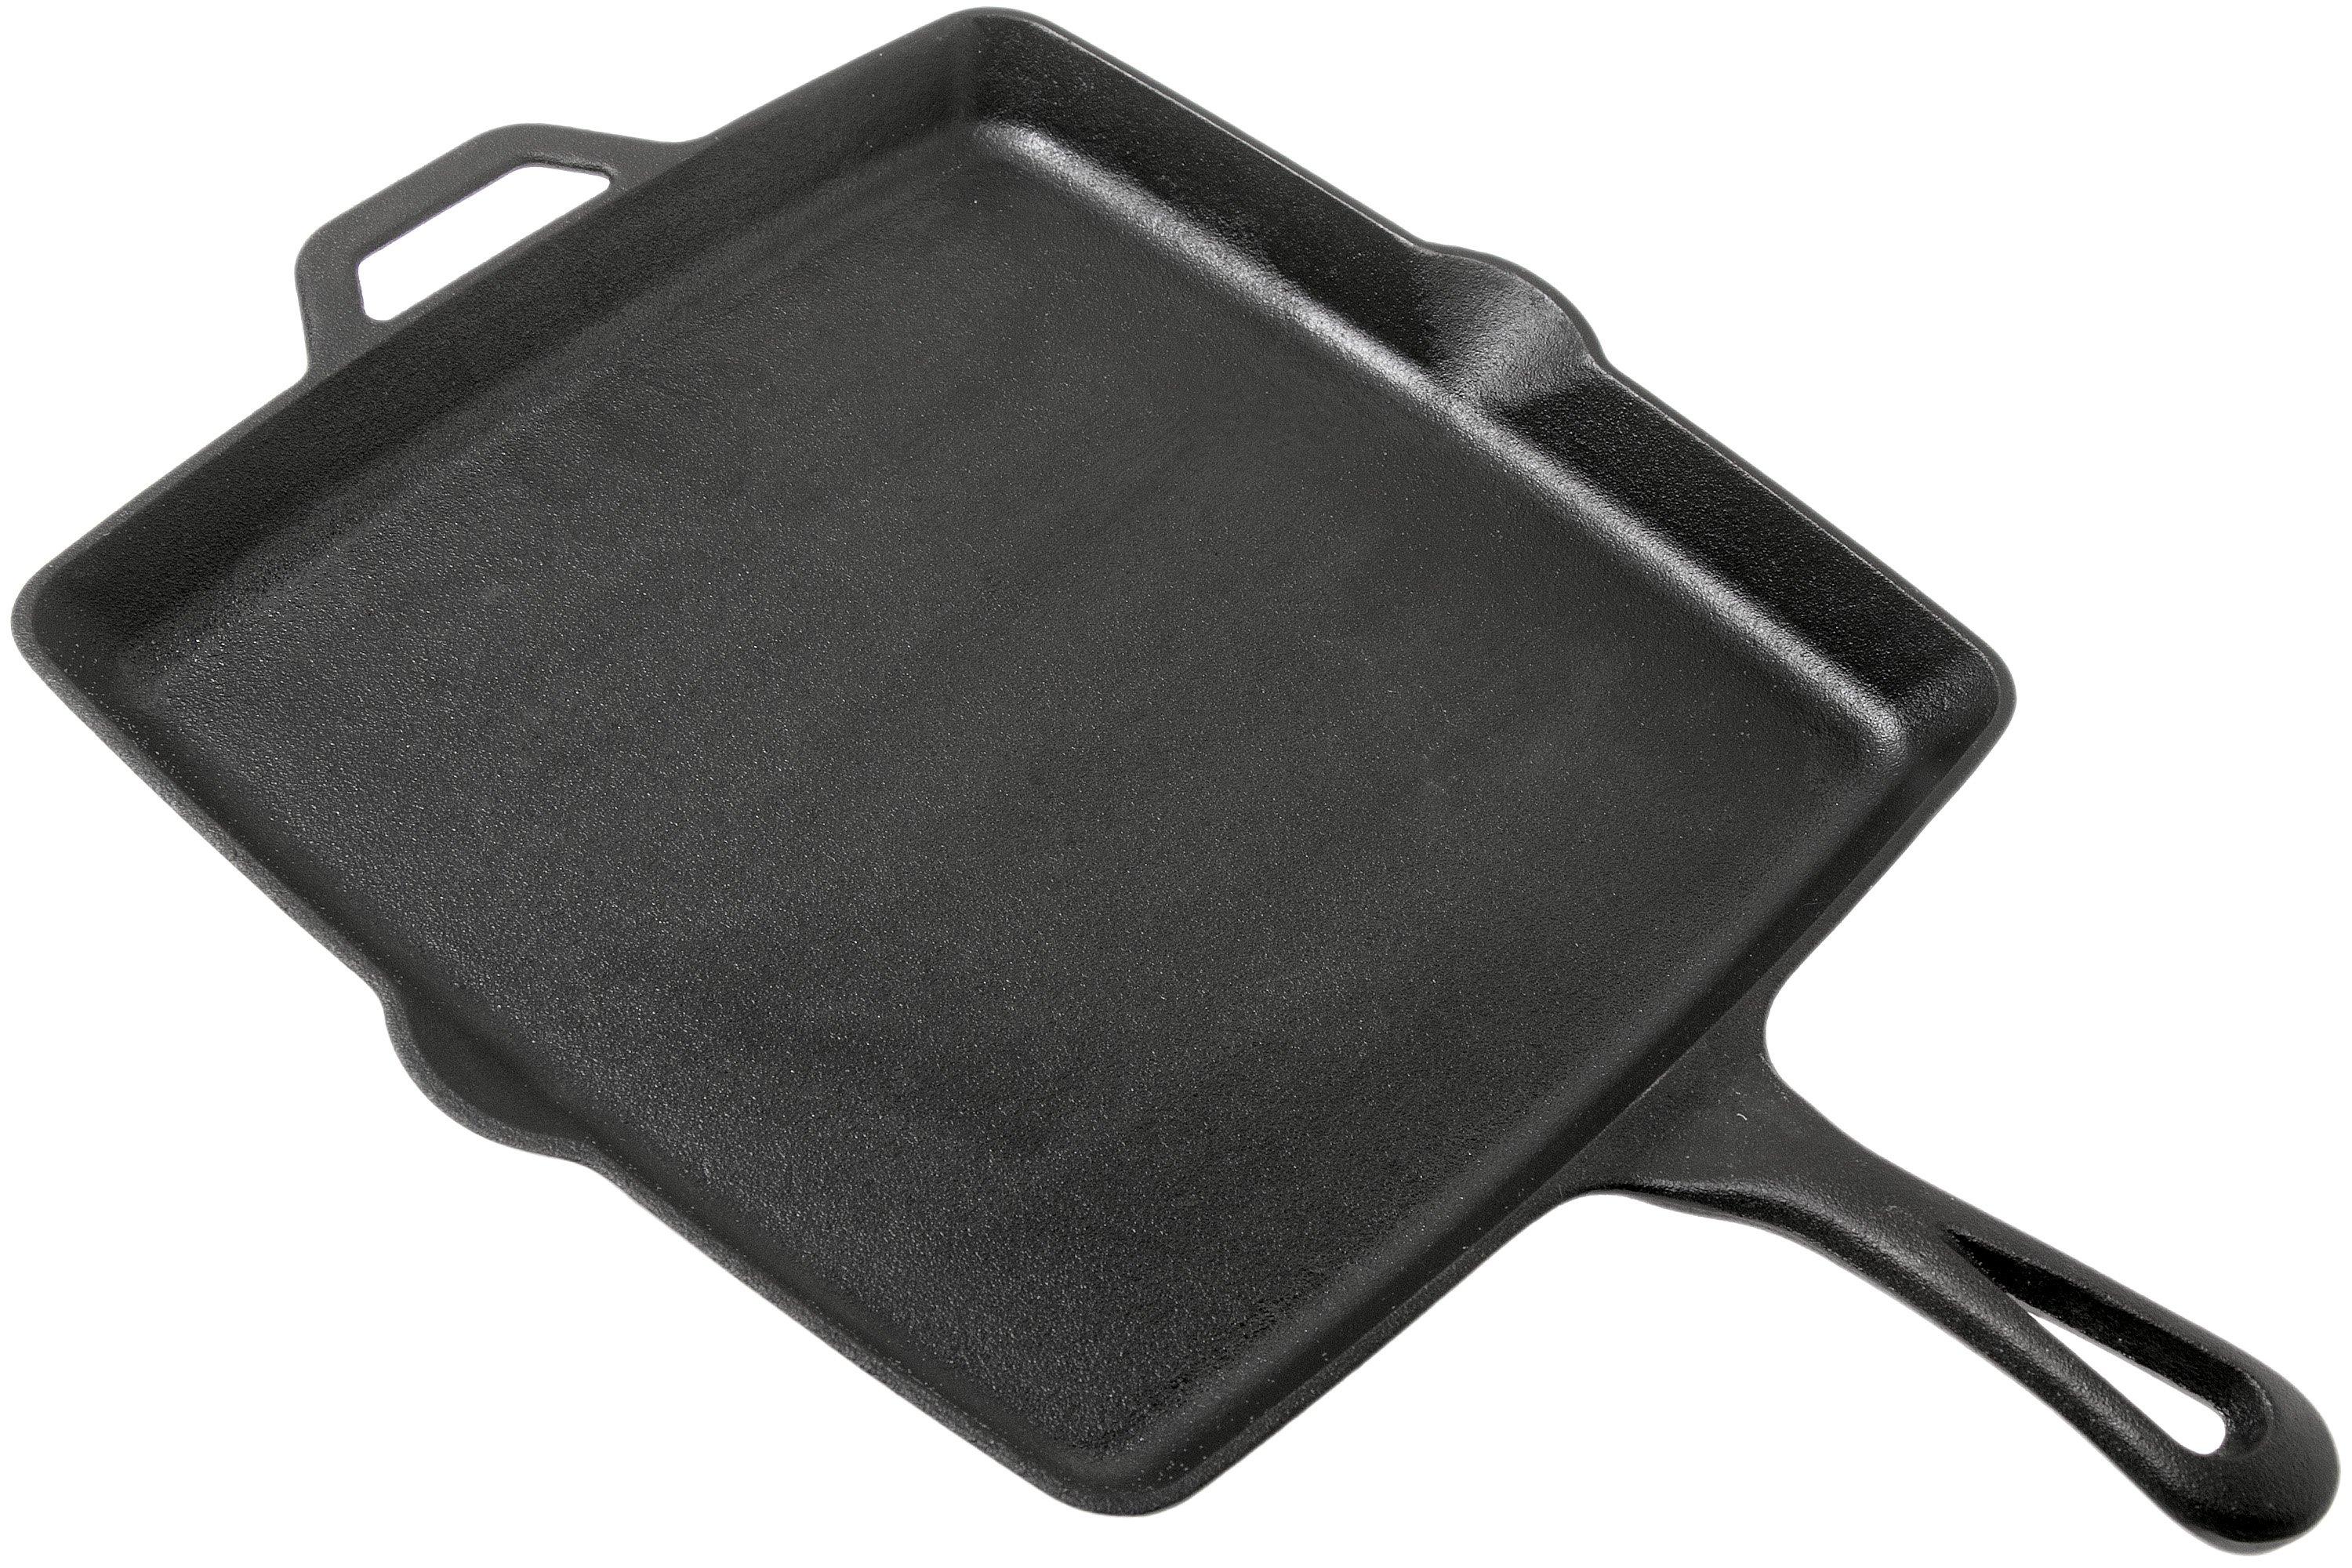 Camp Chef SQ11 11” Square Skillet, 28 cm | Advantageously shopping at ...